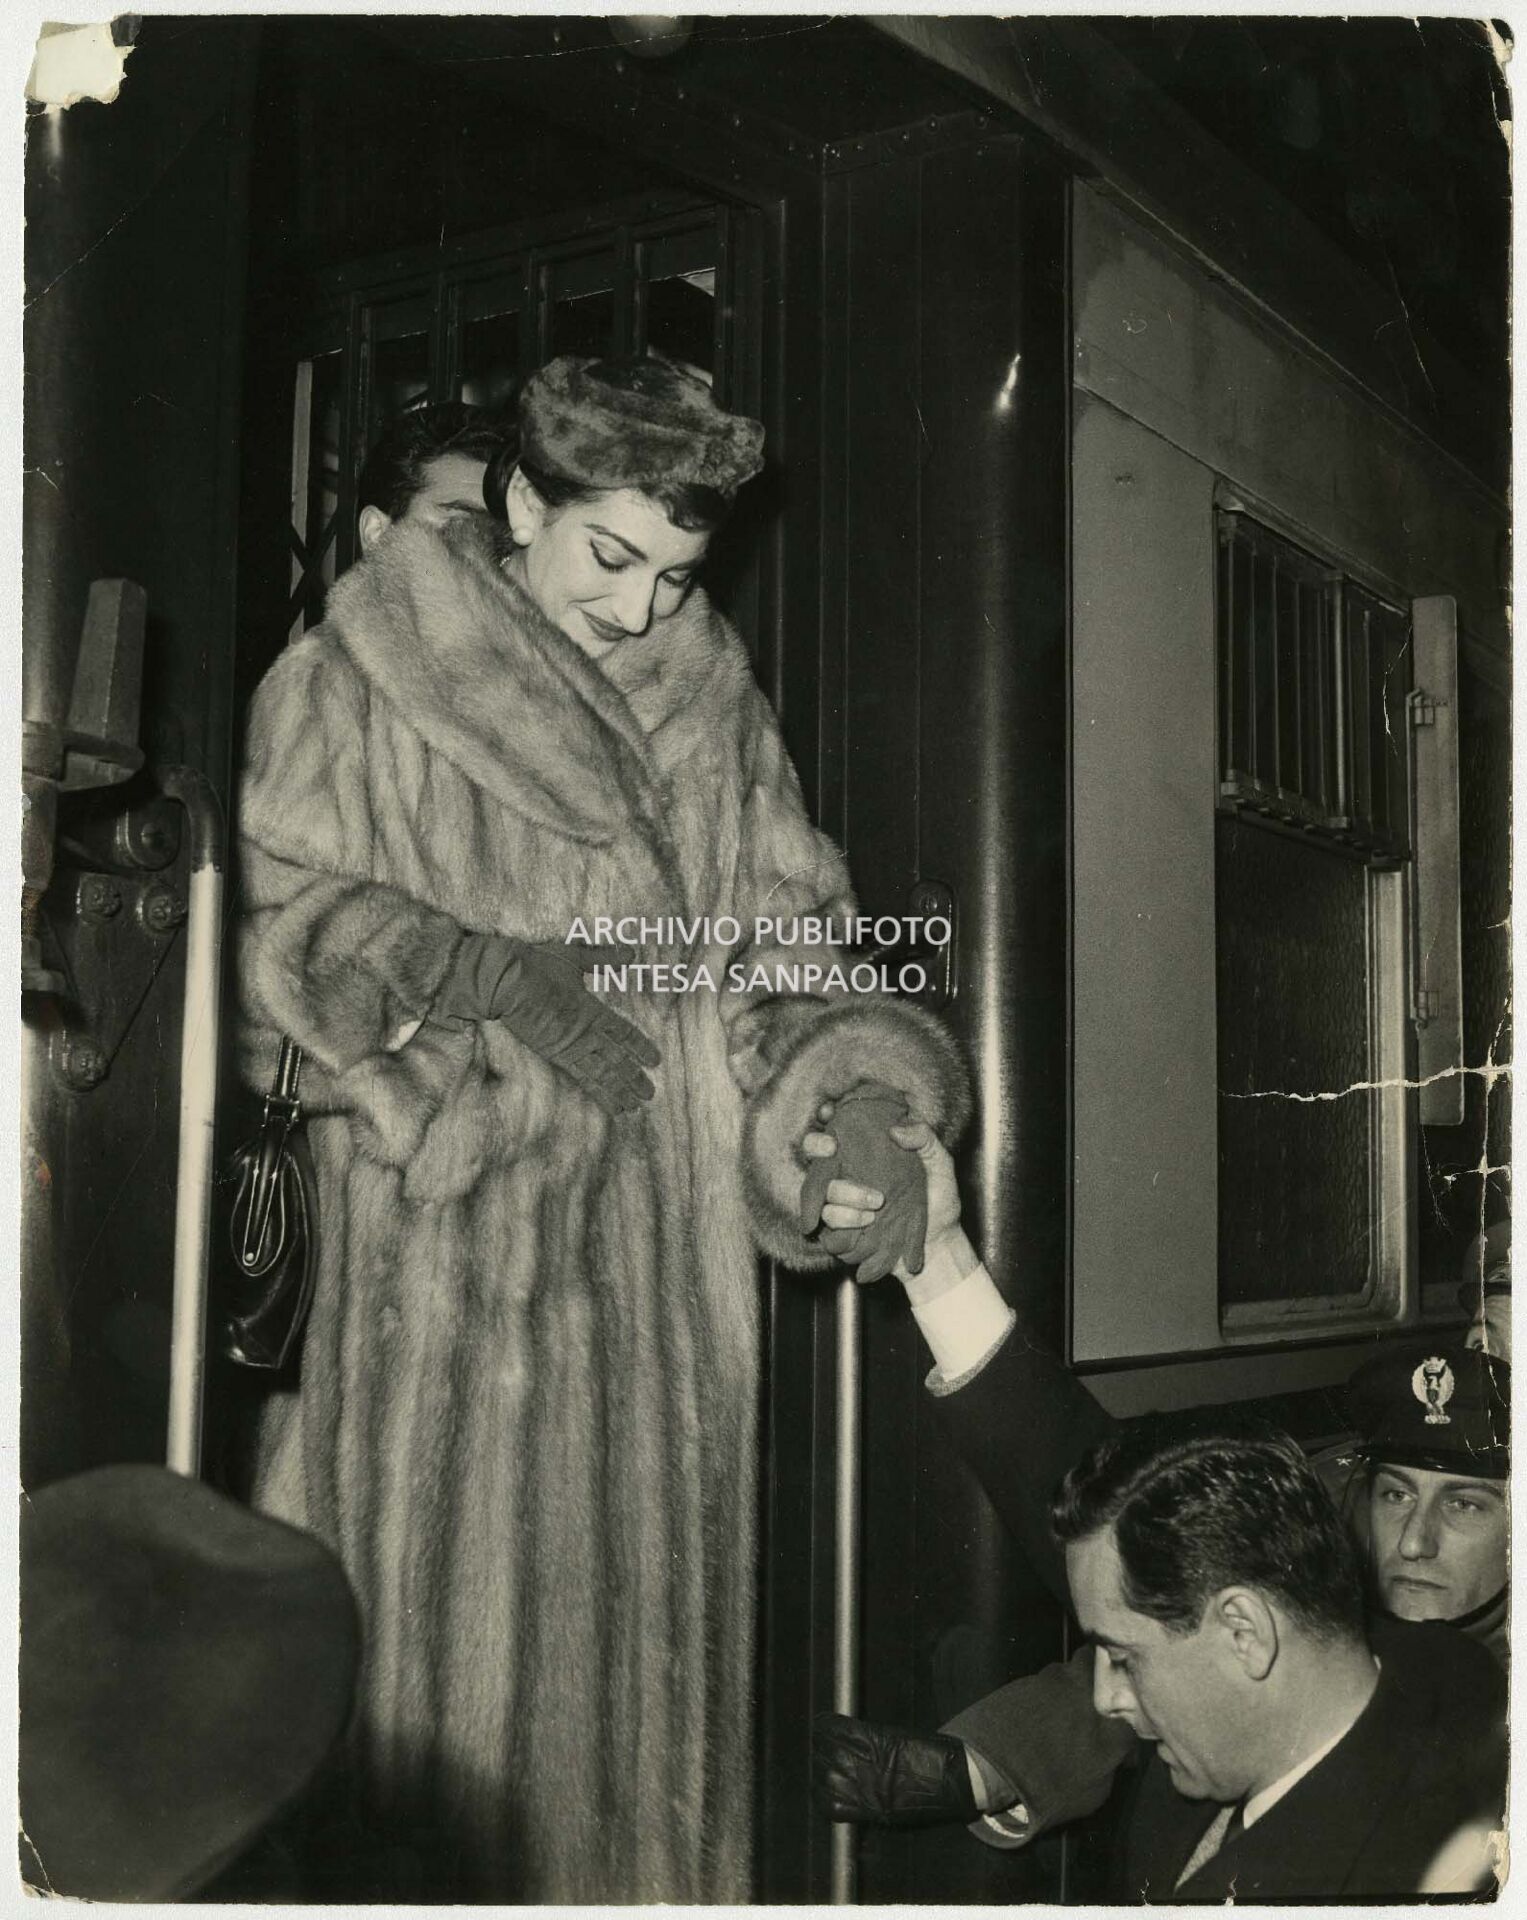 Maria Callas at Milan's Stazione Centrale on her return from the interrupted "Première" at the Teatro dell'Opera in Rome.